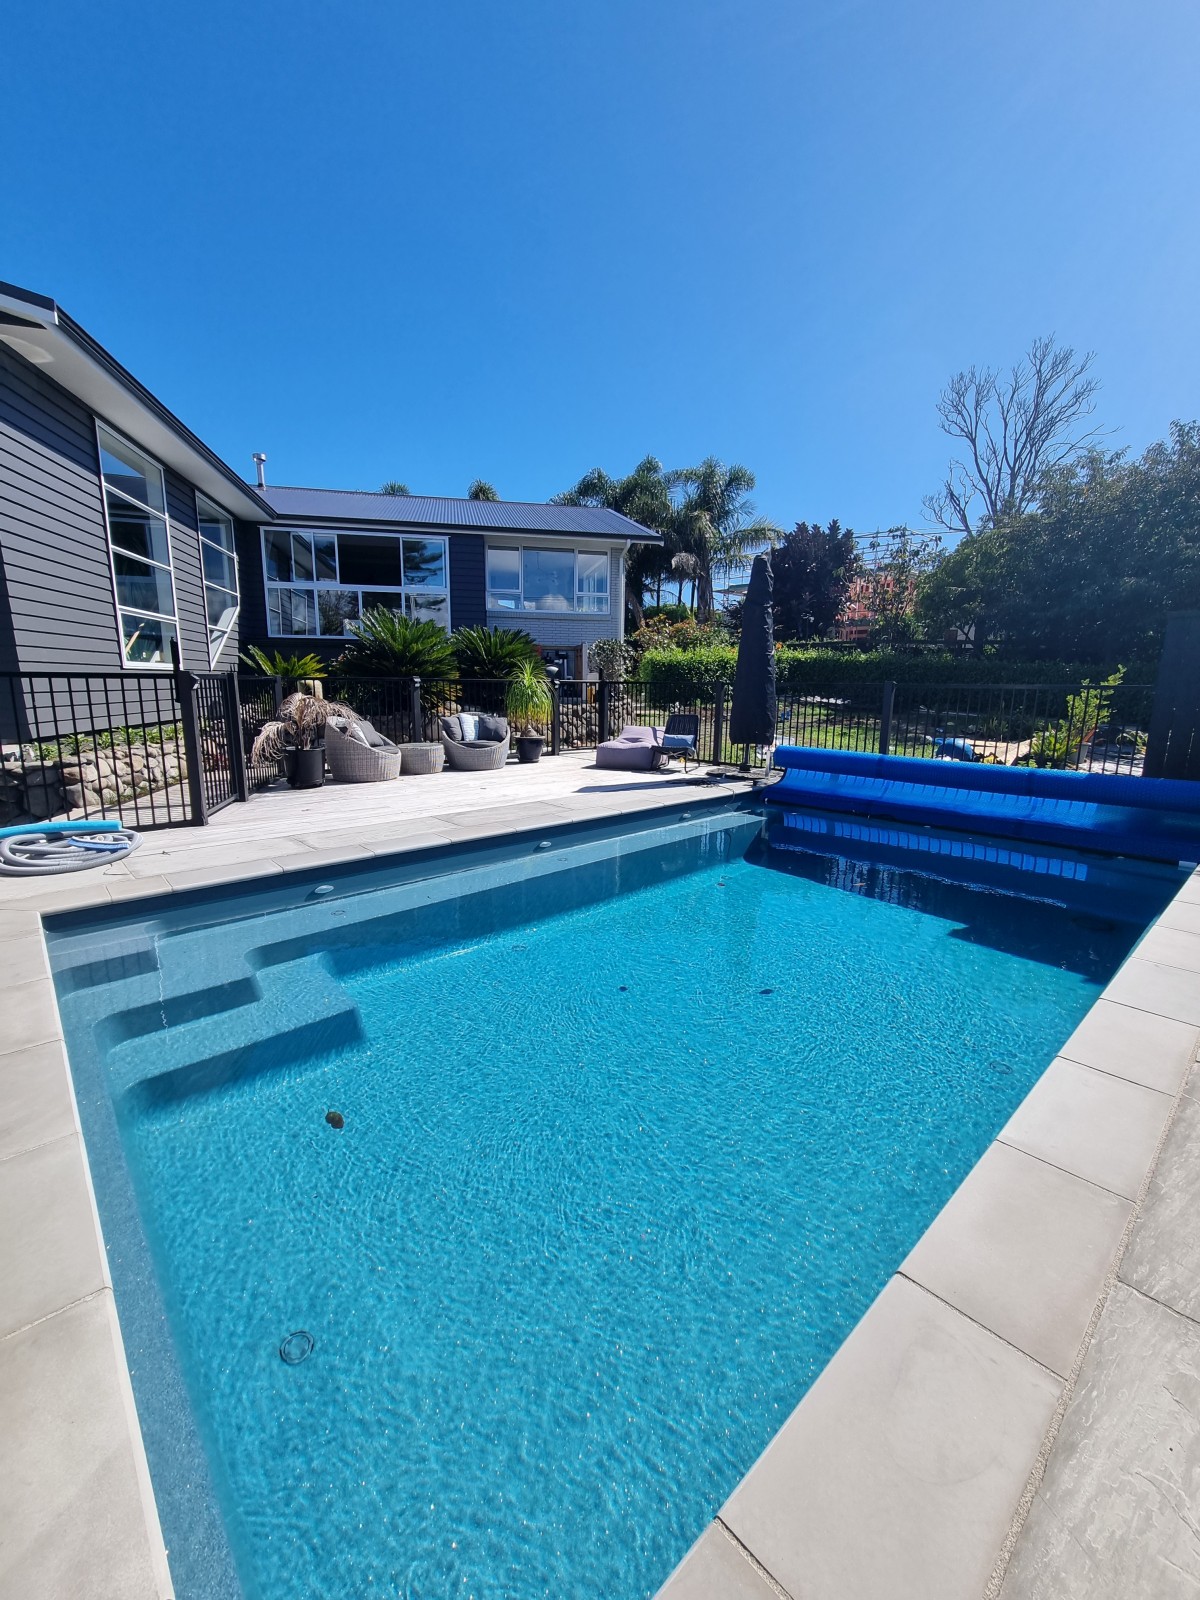 The Benefits of Owning a Swimming Pool - Leisure Pools New Zealand